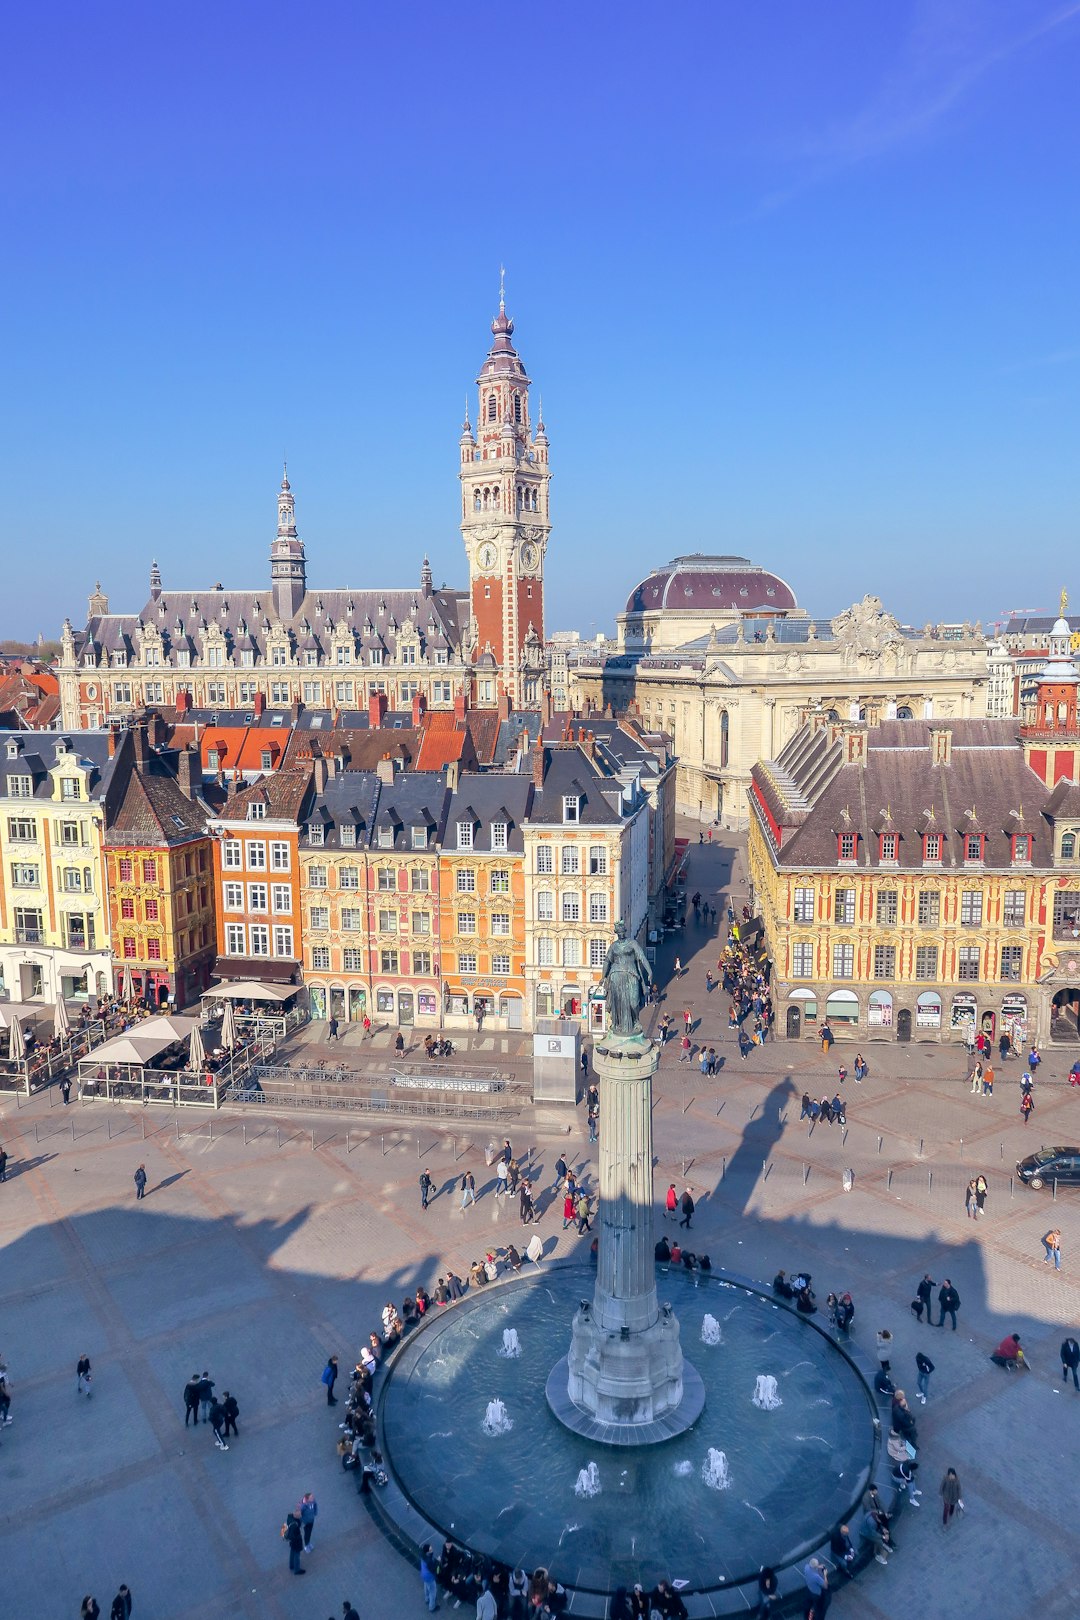 View of the main square in Lille, in the city center in the north of France. The buildings are colorful and the architecture typical of the region.